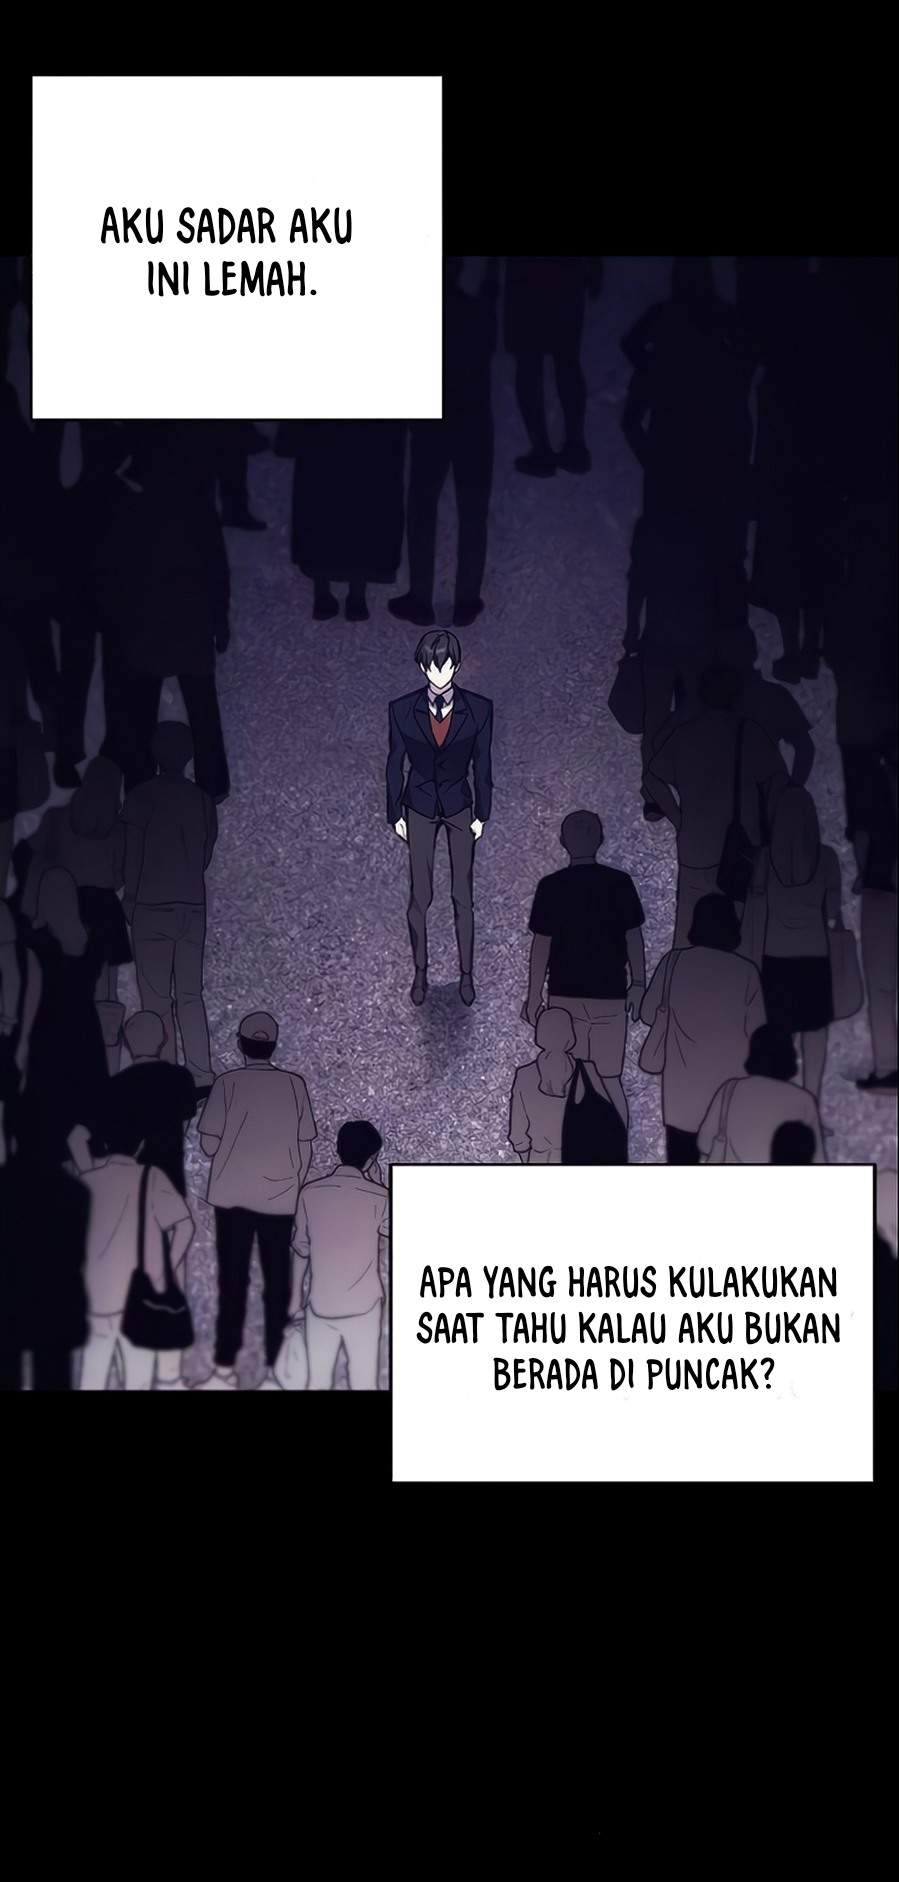 How to Live as a Villain Chapter 17